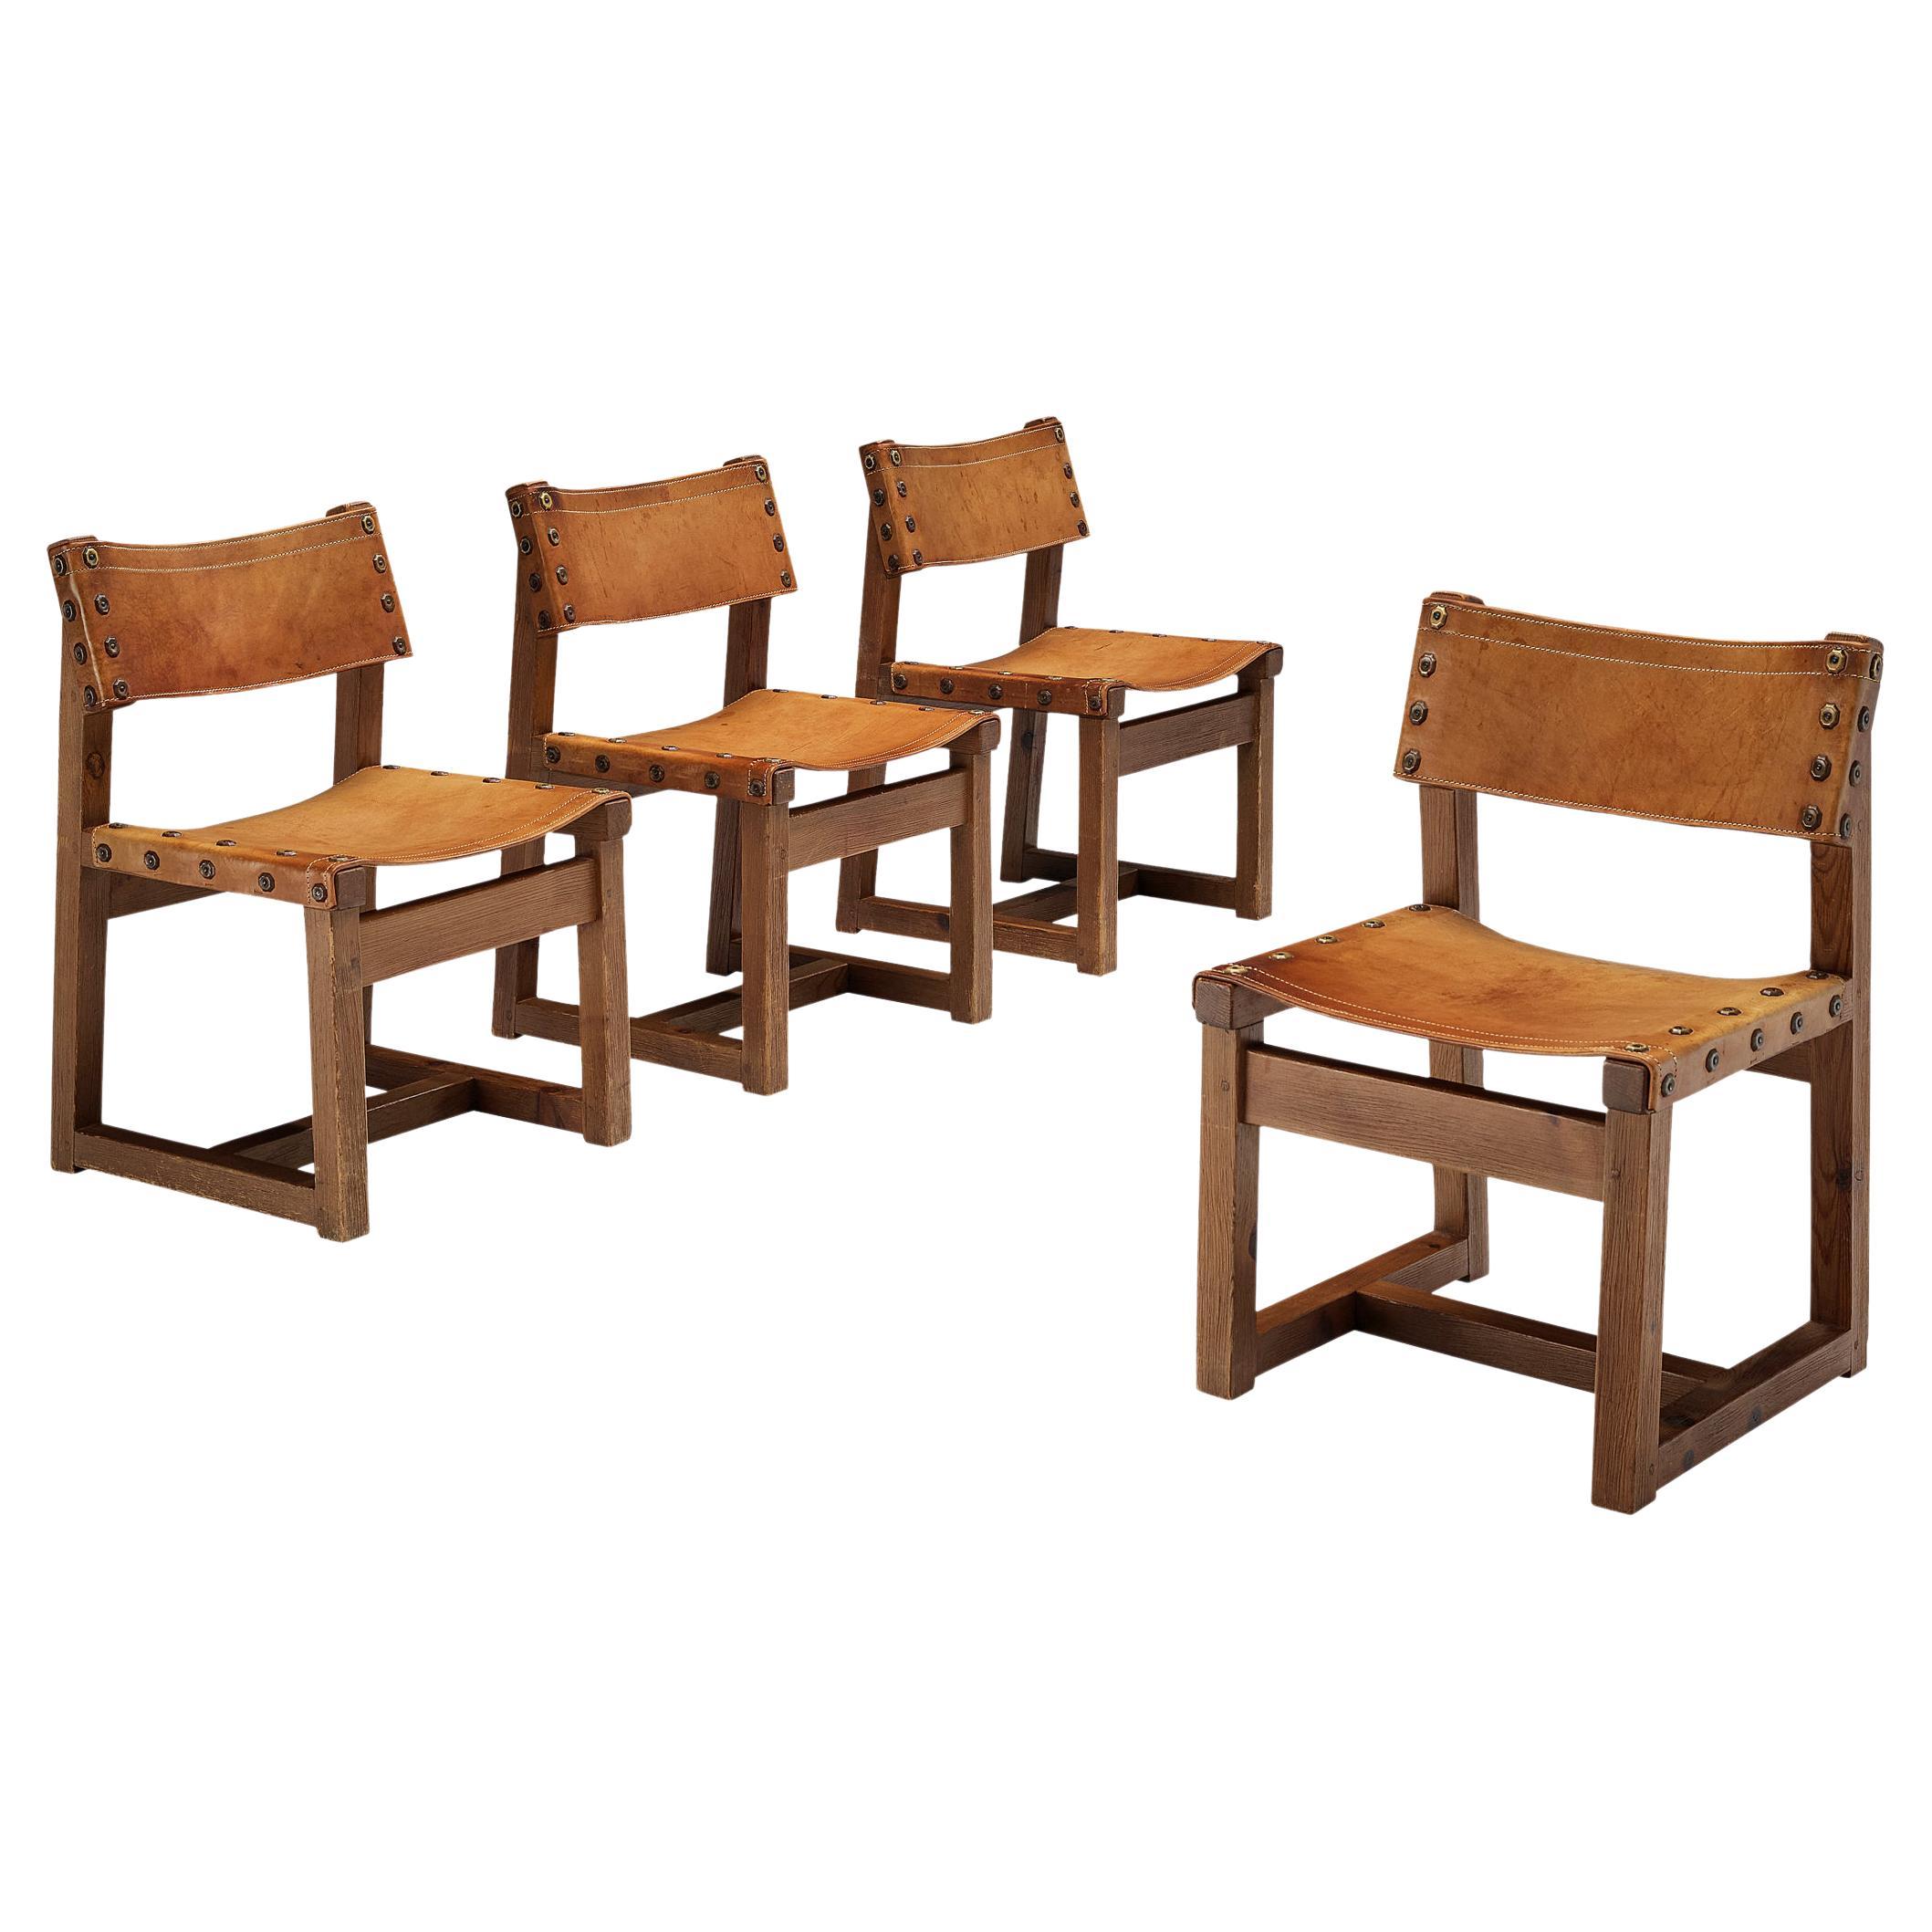 Set of Four Brutalist Spanish Biosca Chairs in Leather